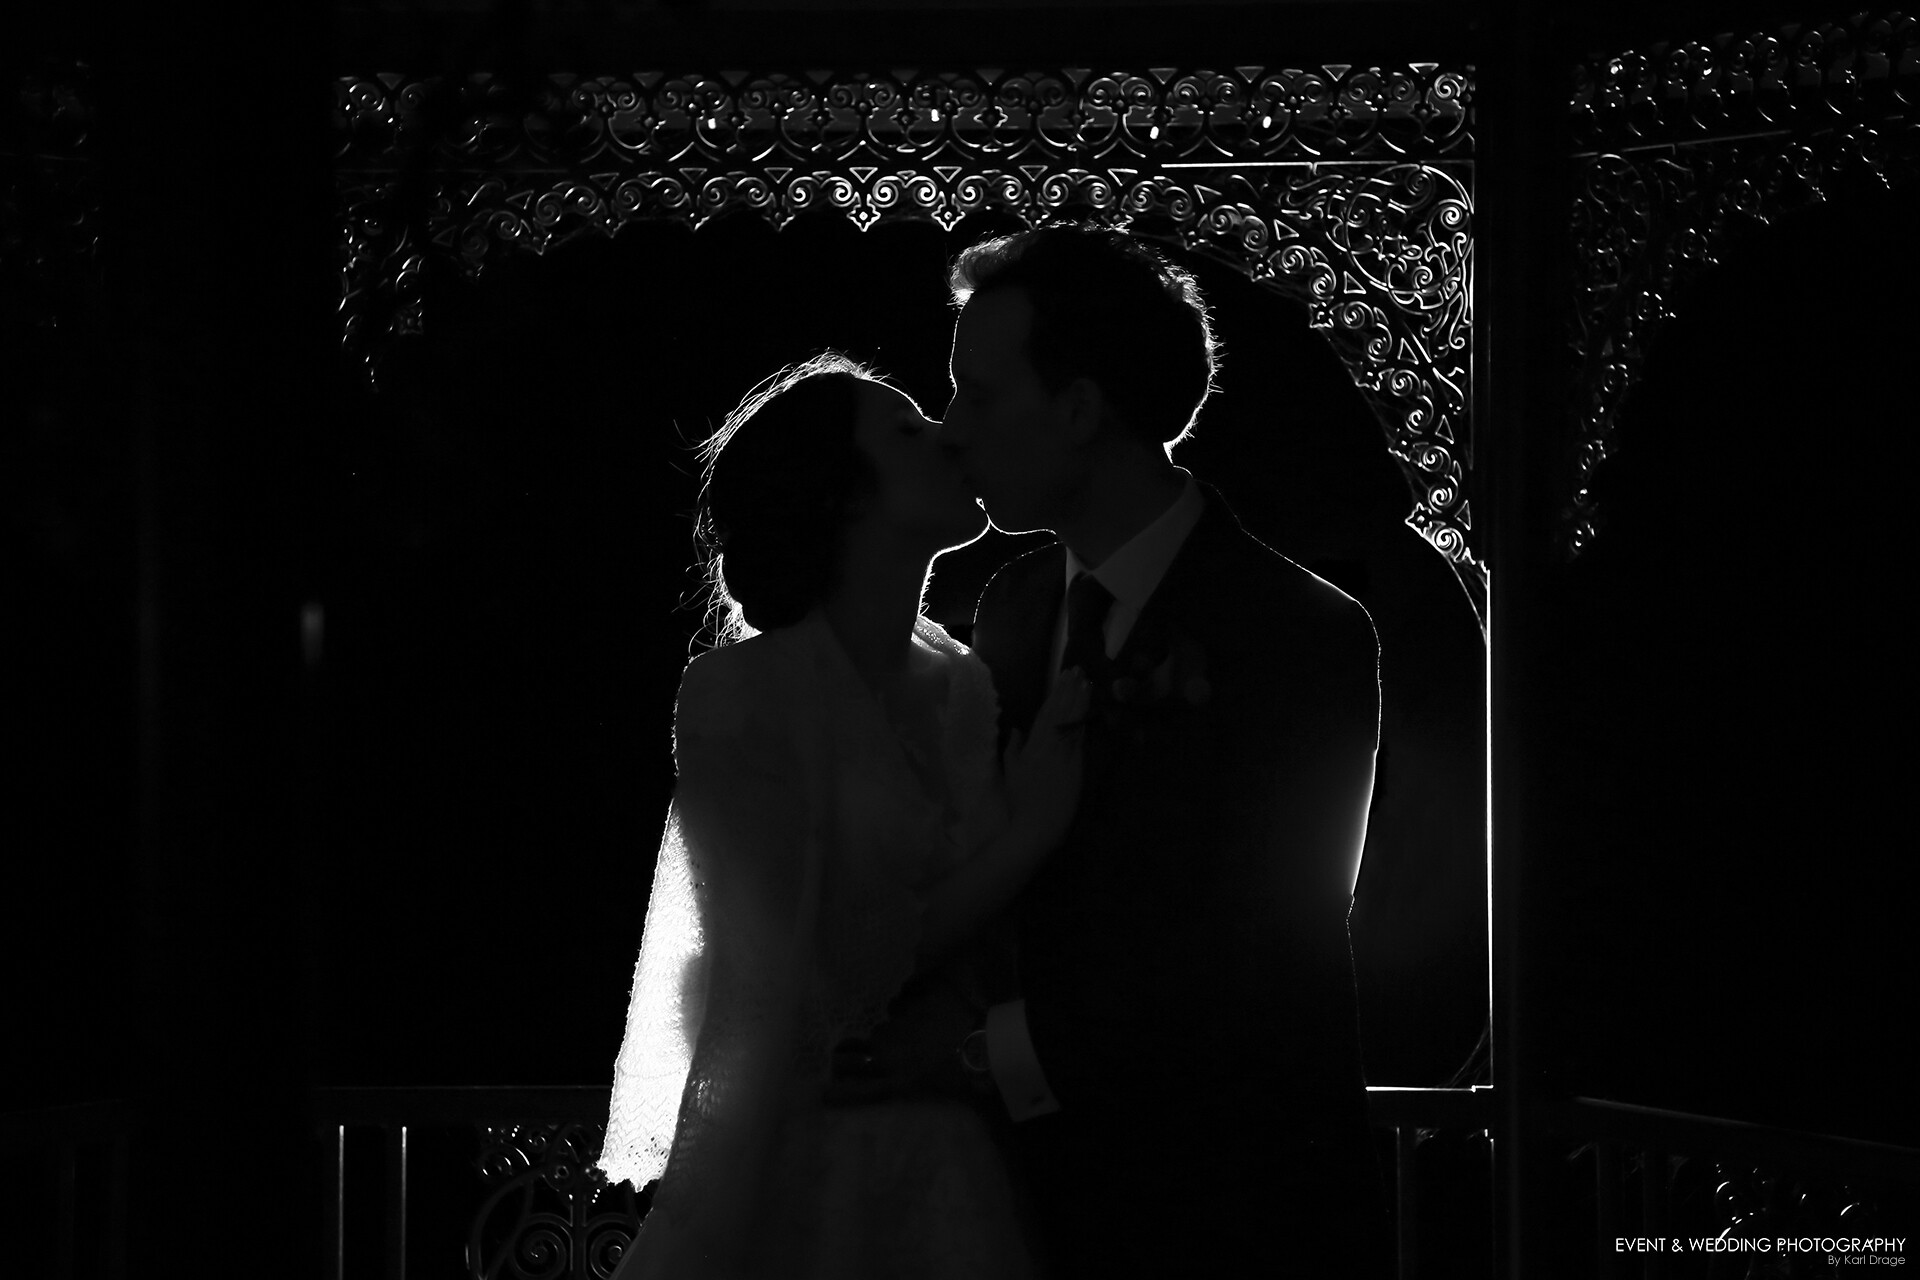 Edge-lit silhouette shot of a bride and groom on their wedding day